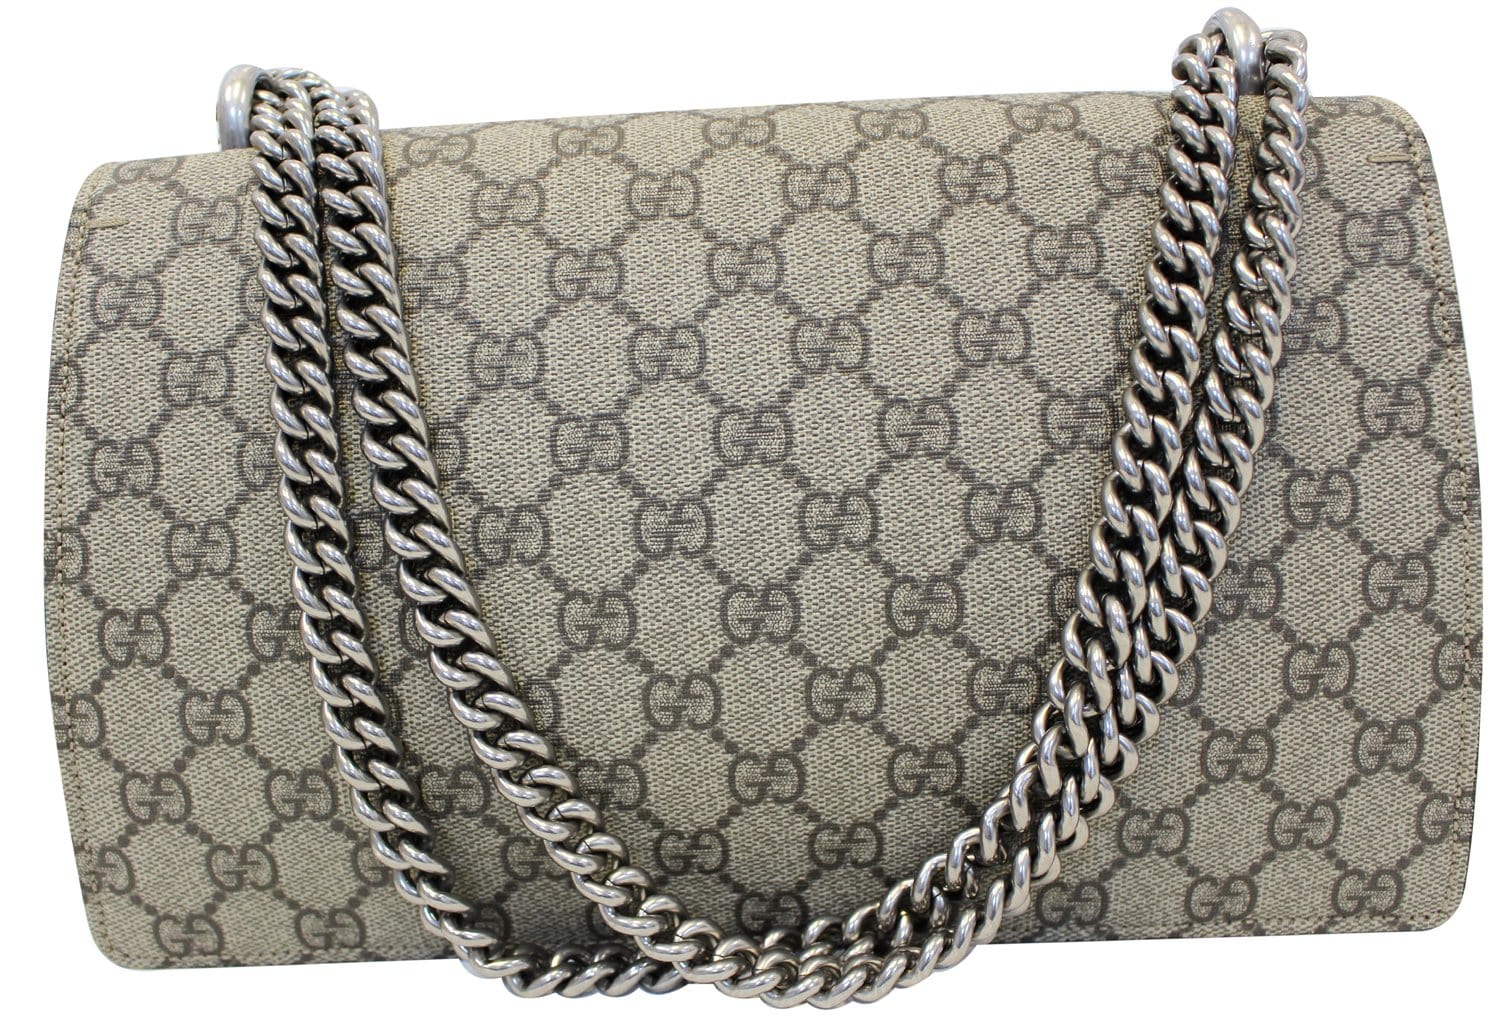 Gucci - Authenticated Dionysus Handbag - Cloth Beige for Women, Good Condition